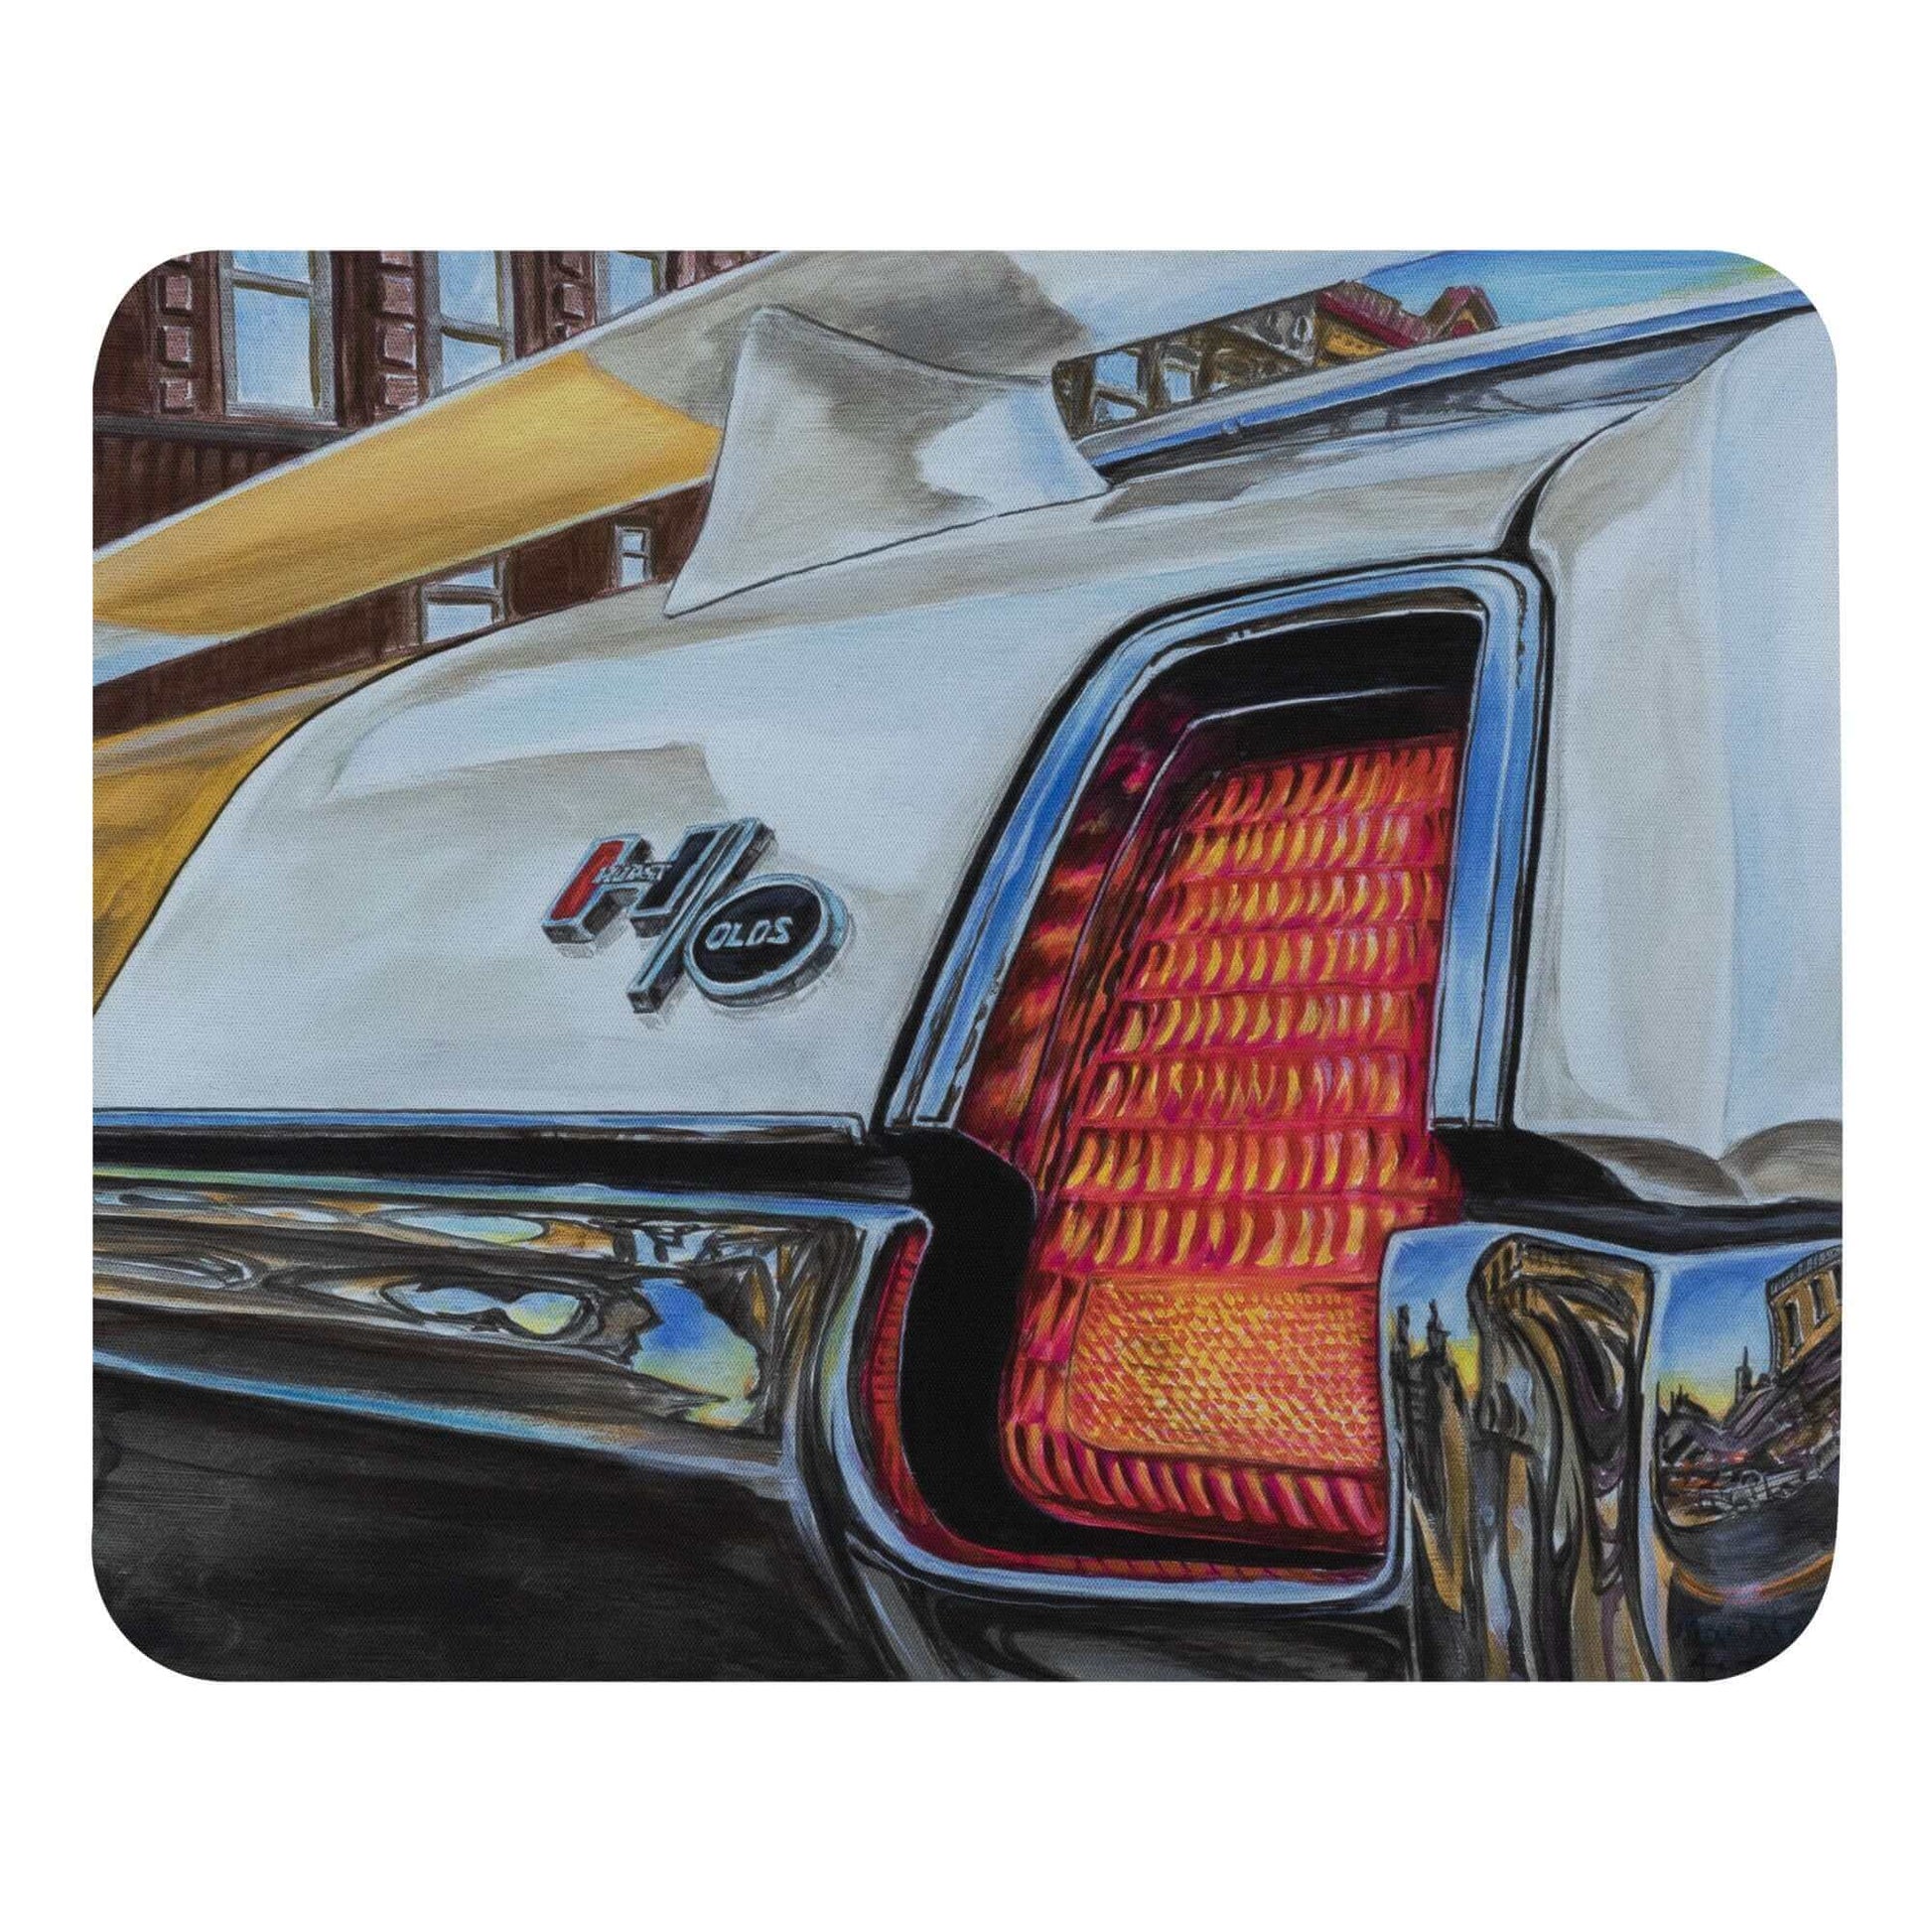 Doctor Olds' Hurst 69 - Mouse pad American Muscle car enthusiast classic cars Dr.Hurst muscle car mousepad Olds Olds Hurts Oldsmobile